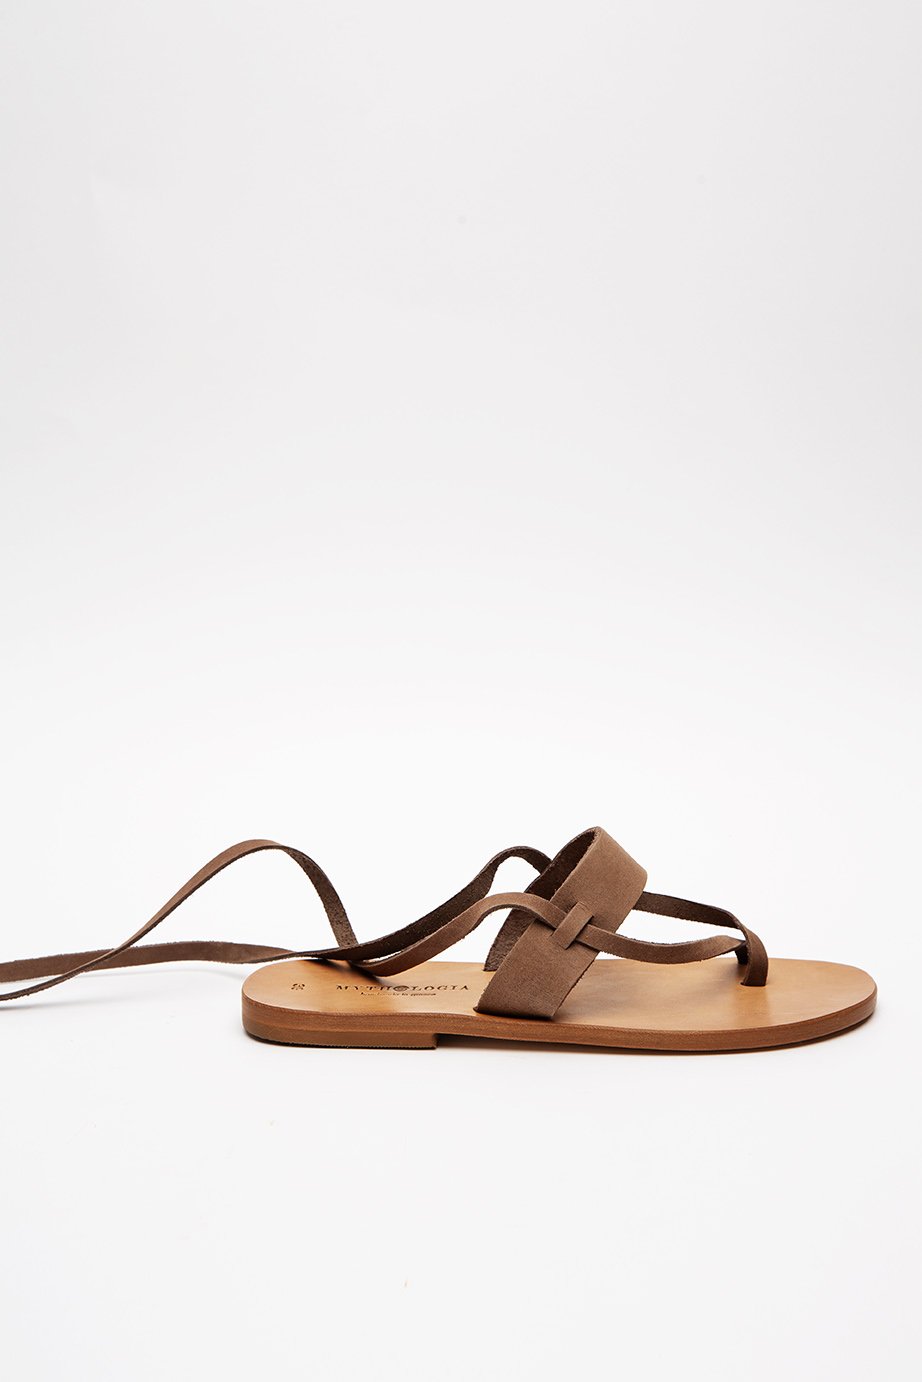 LEMNOS COLLECTION — Mythologia | Leather Sandals for Women